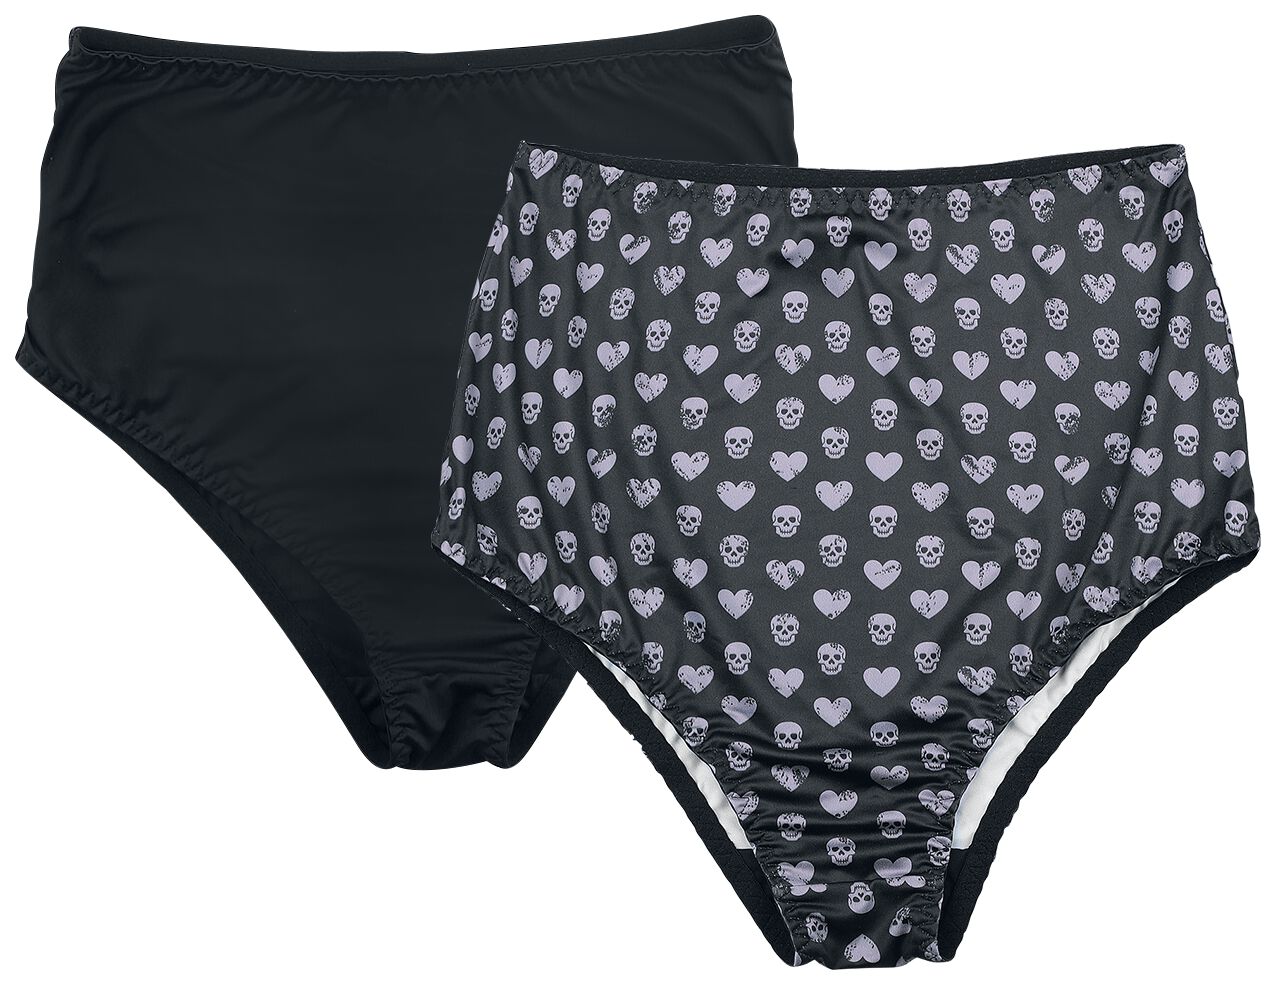 Rock Rebel by EMP Black High-Waist Panties with Skull and Heart Design Panty black